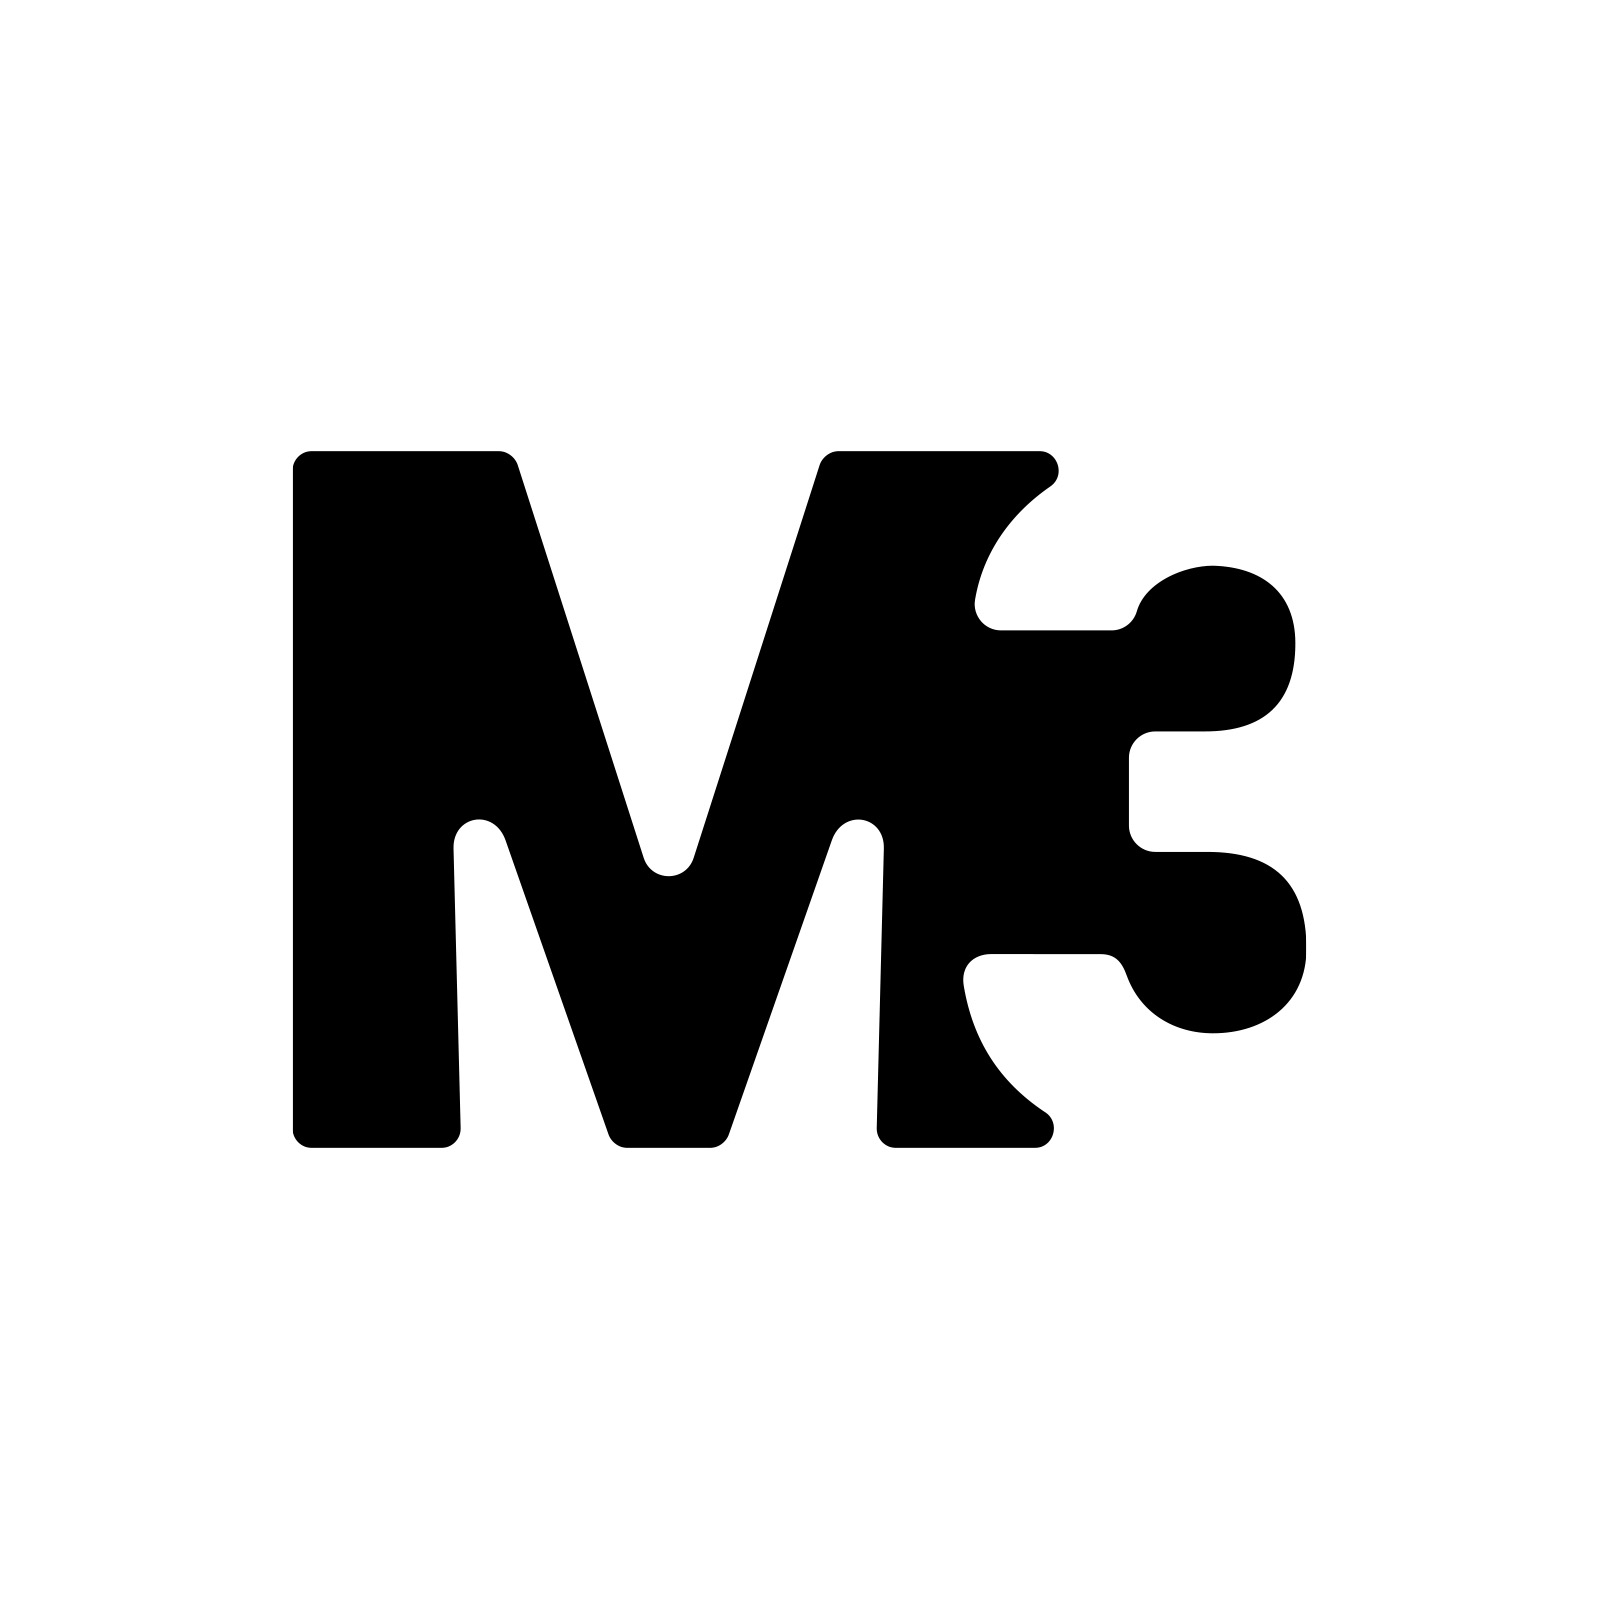 M3 logo design by logo designer Stanislav+Regis for your inspiration and for the worlds largest logo competition